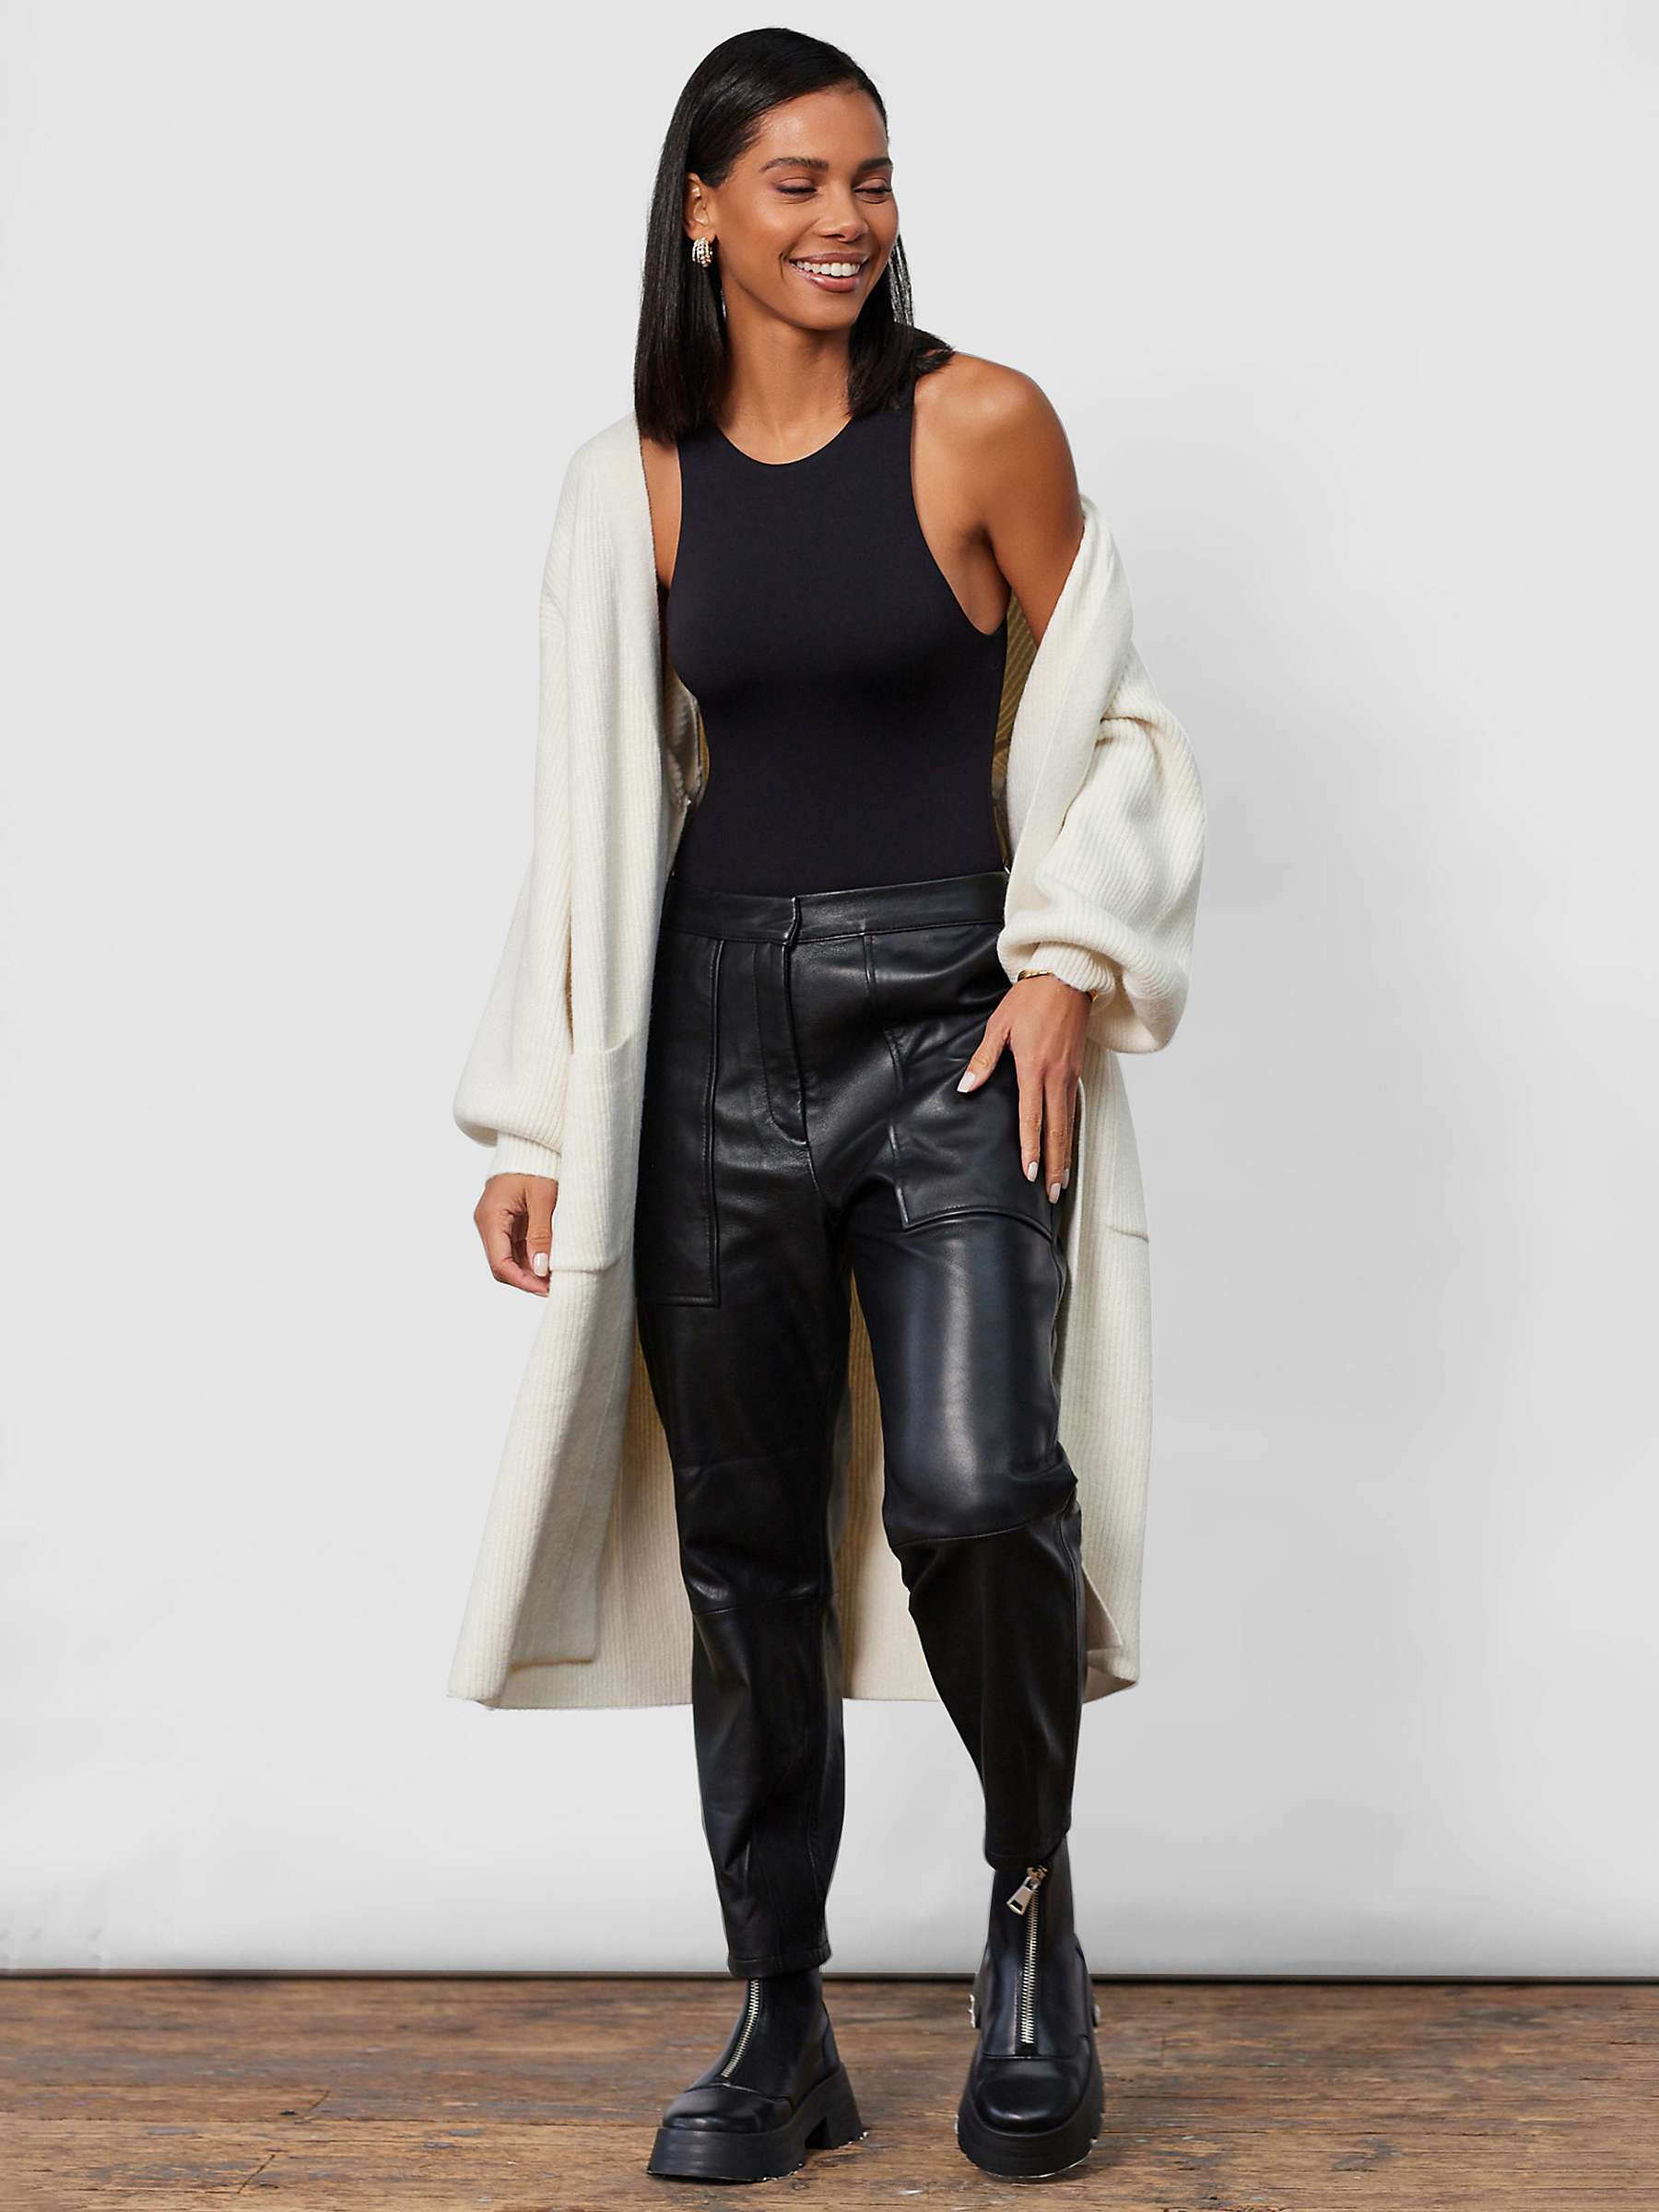 Buy Closet London Leather Trousers, Black Online at johnlewis.com